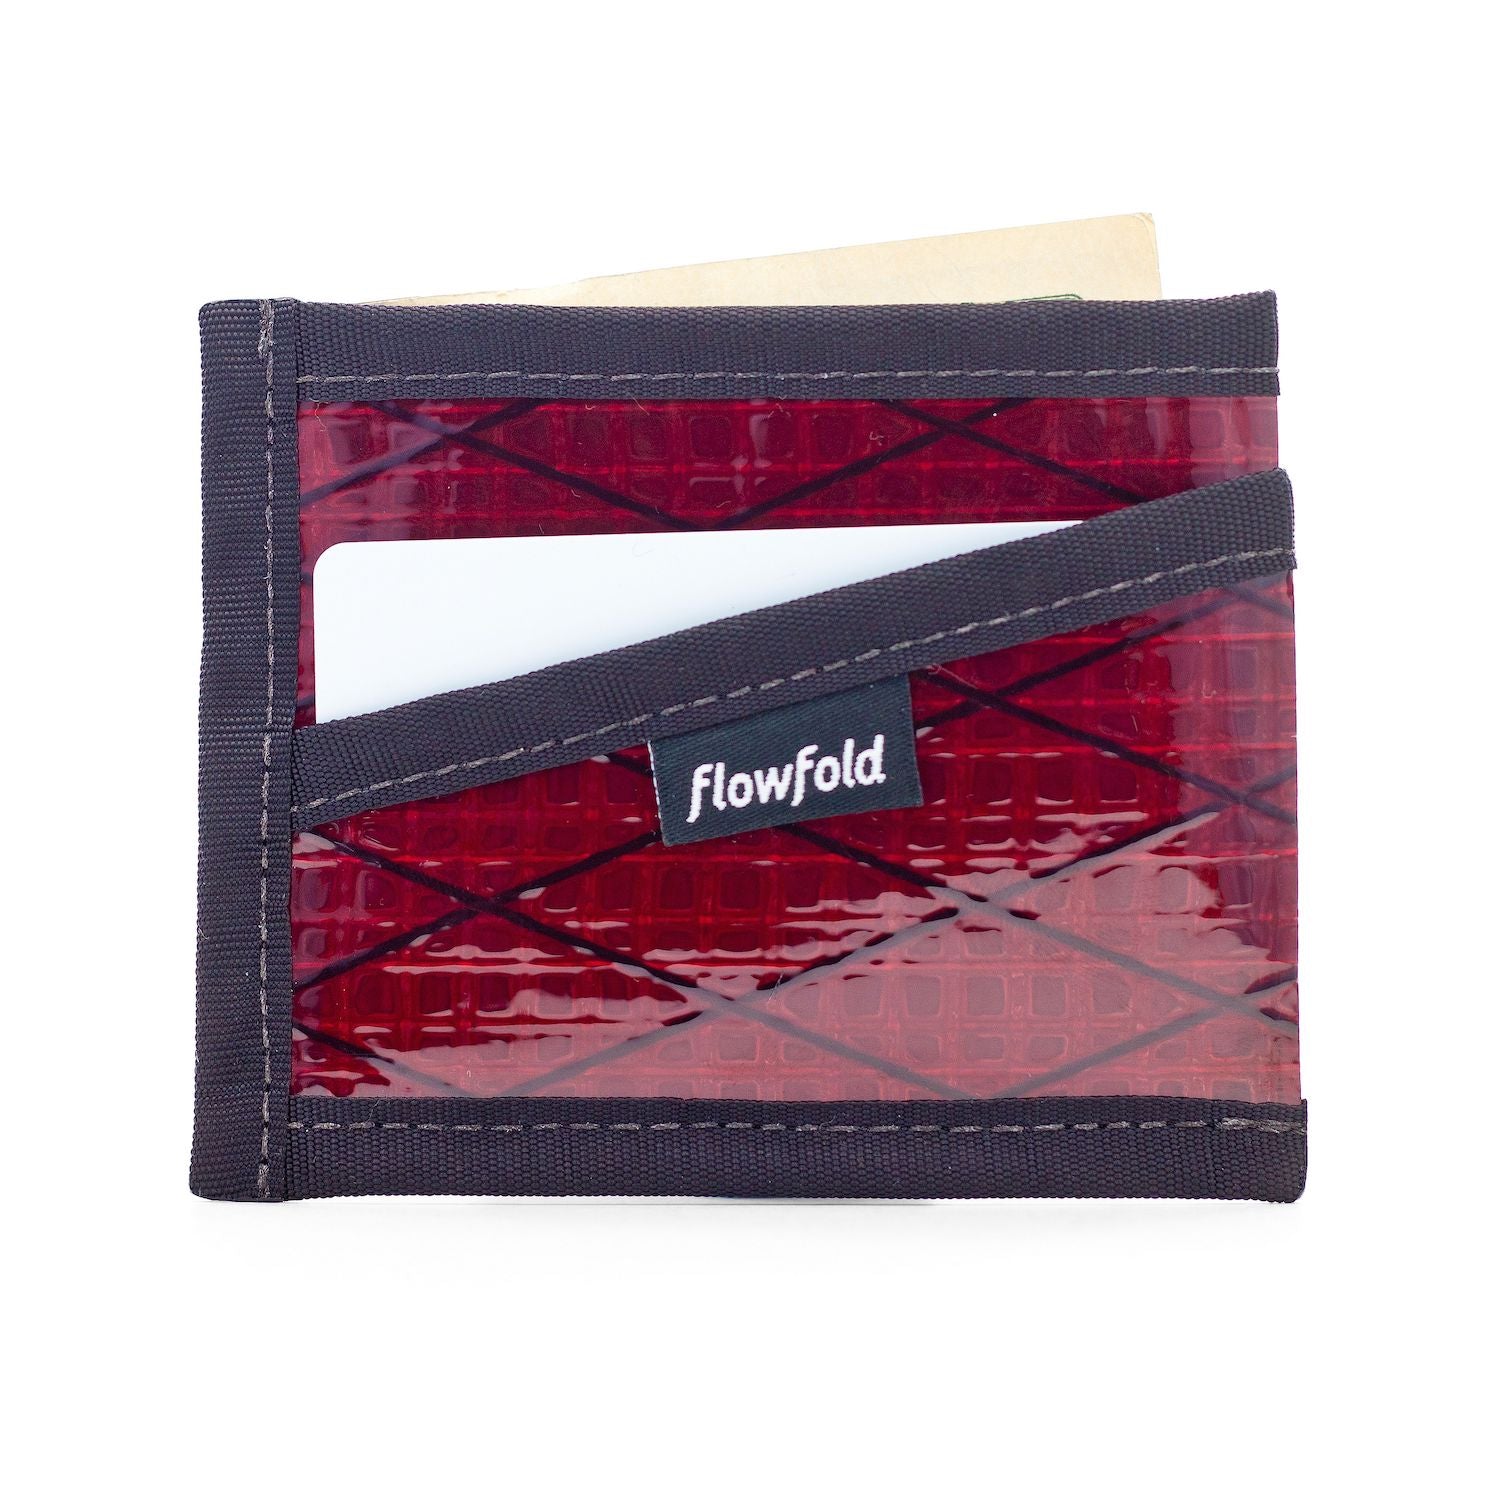 Flowfold Recycled Sailcloth Craftsman Three Pocket Wallet Fiery Red Sailcloth